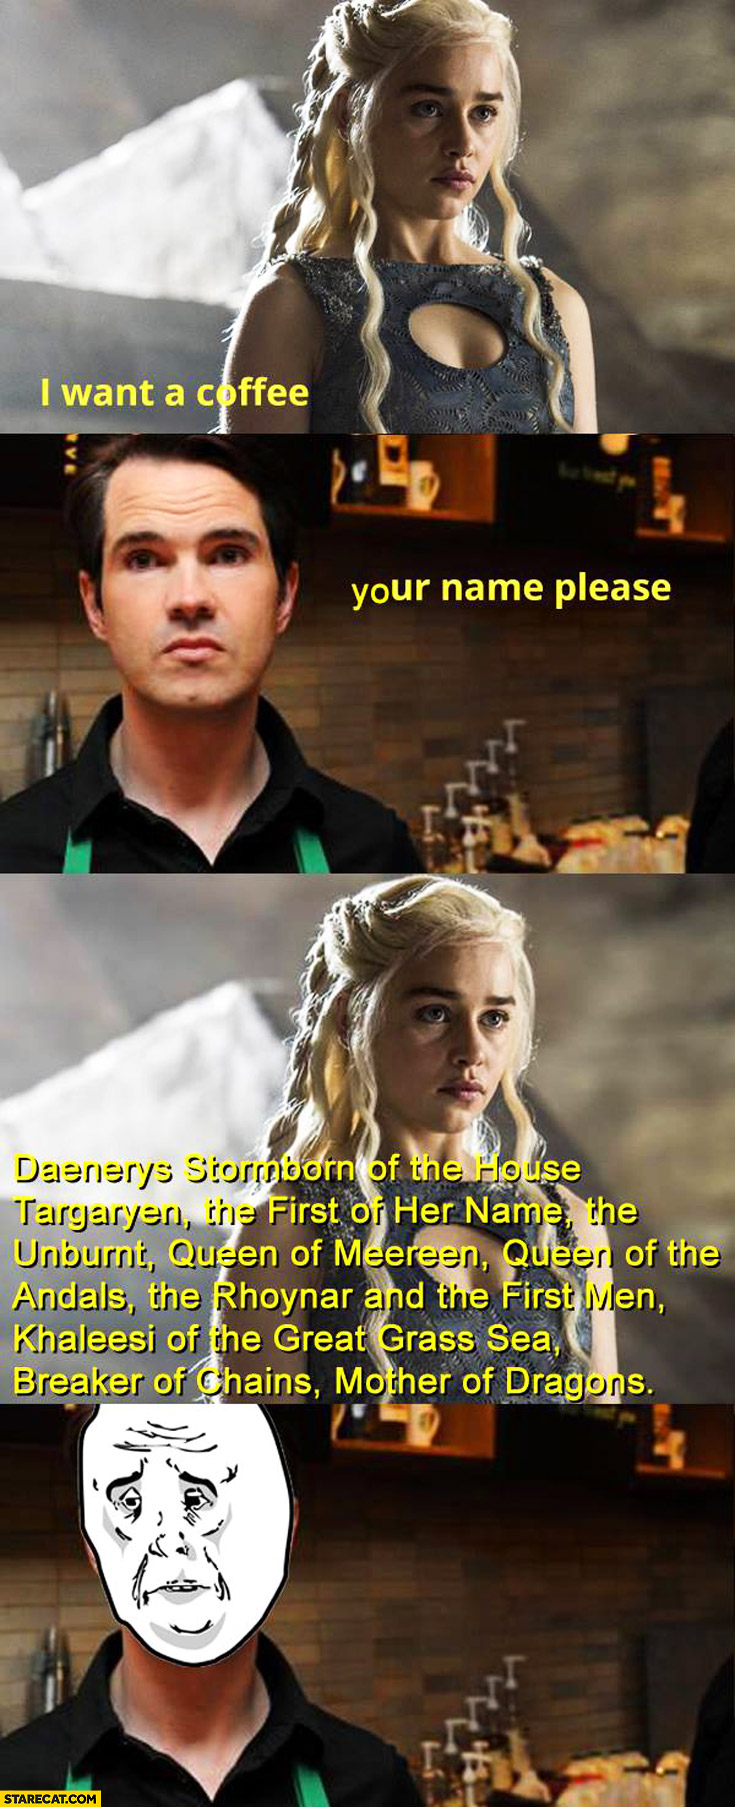 I want a coffee your name please Daenerys Stormborn Game of Thrones